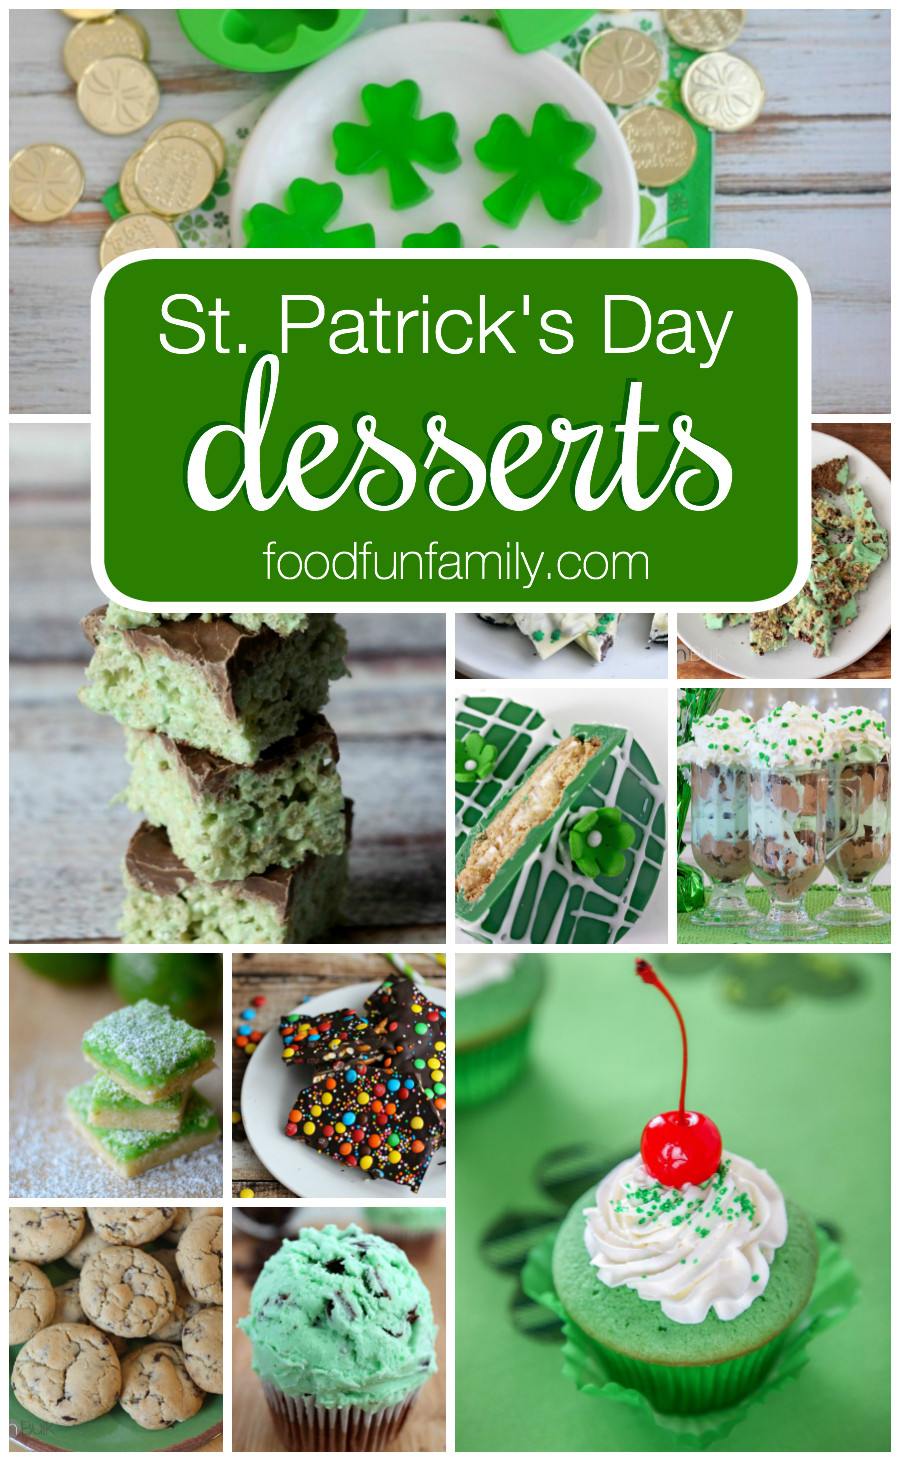 St Patrick's Day Food Recipes
 17 Delicious St Patrick’s Day Desserts